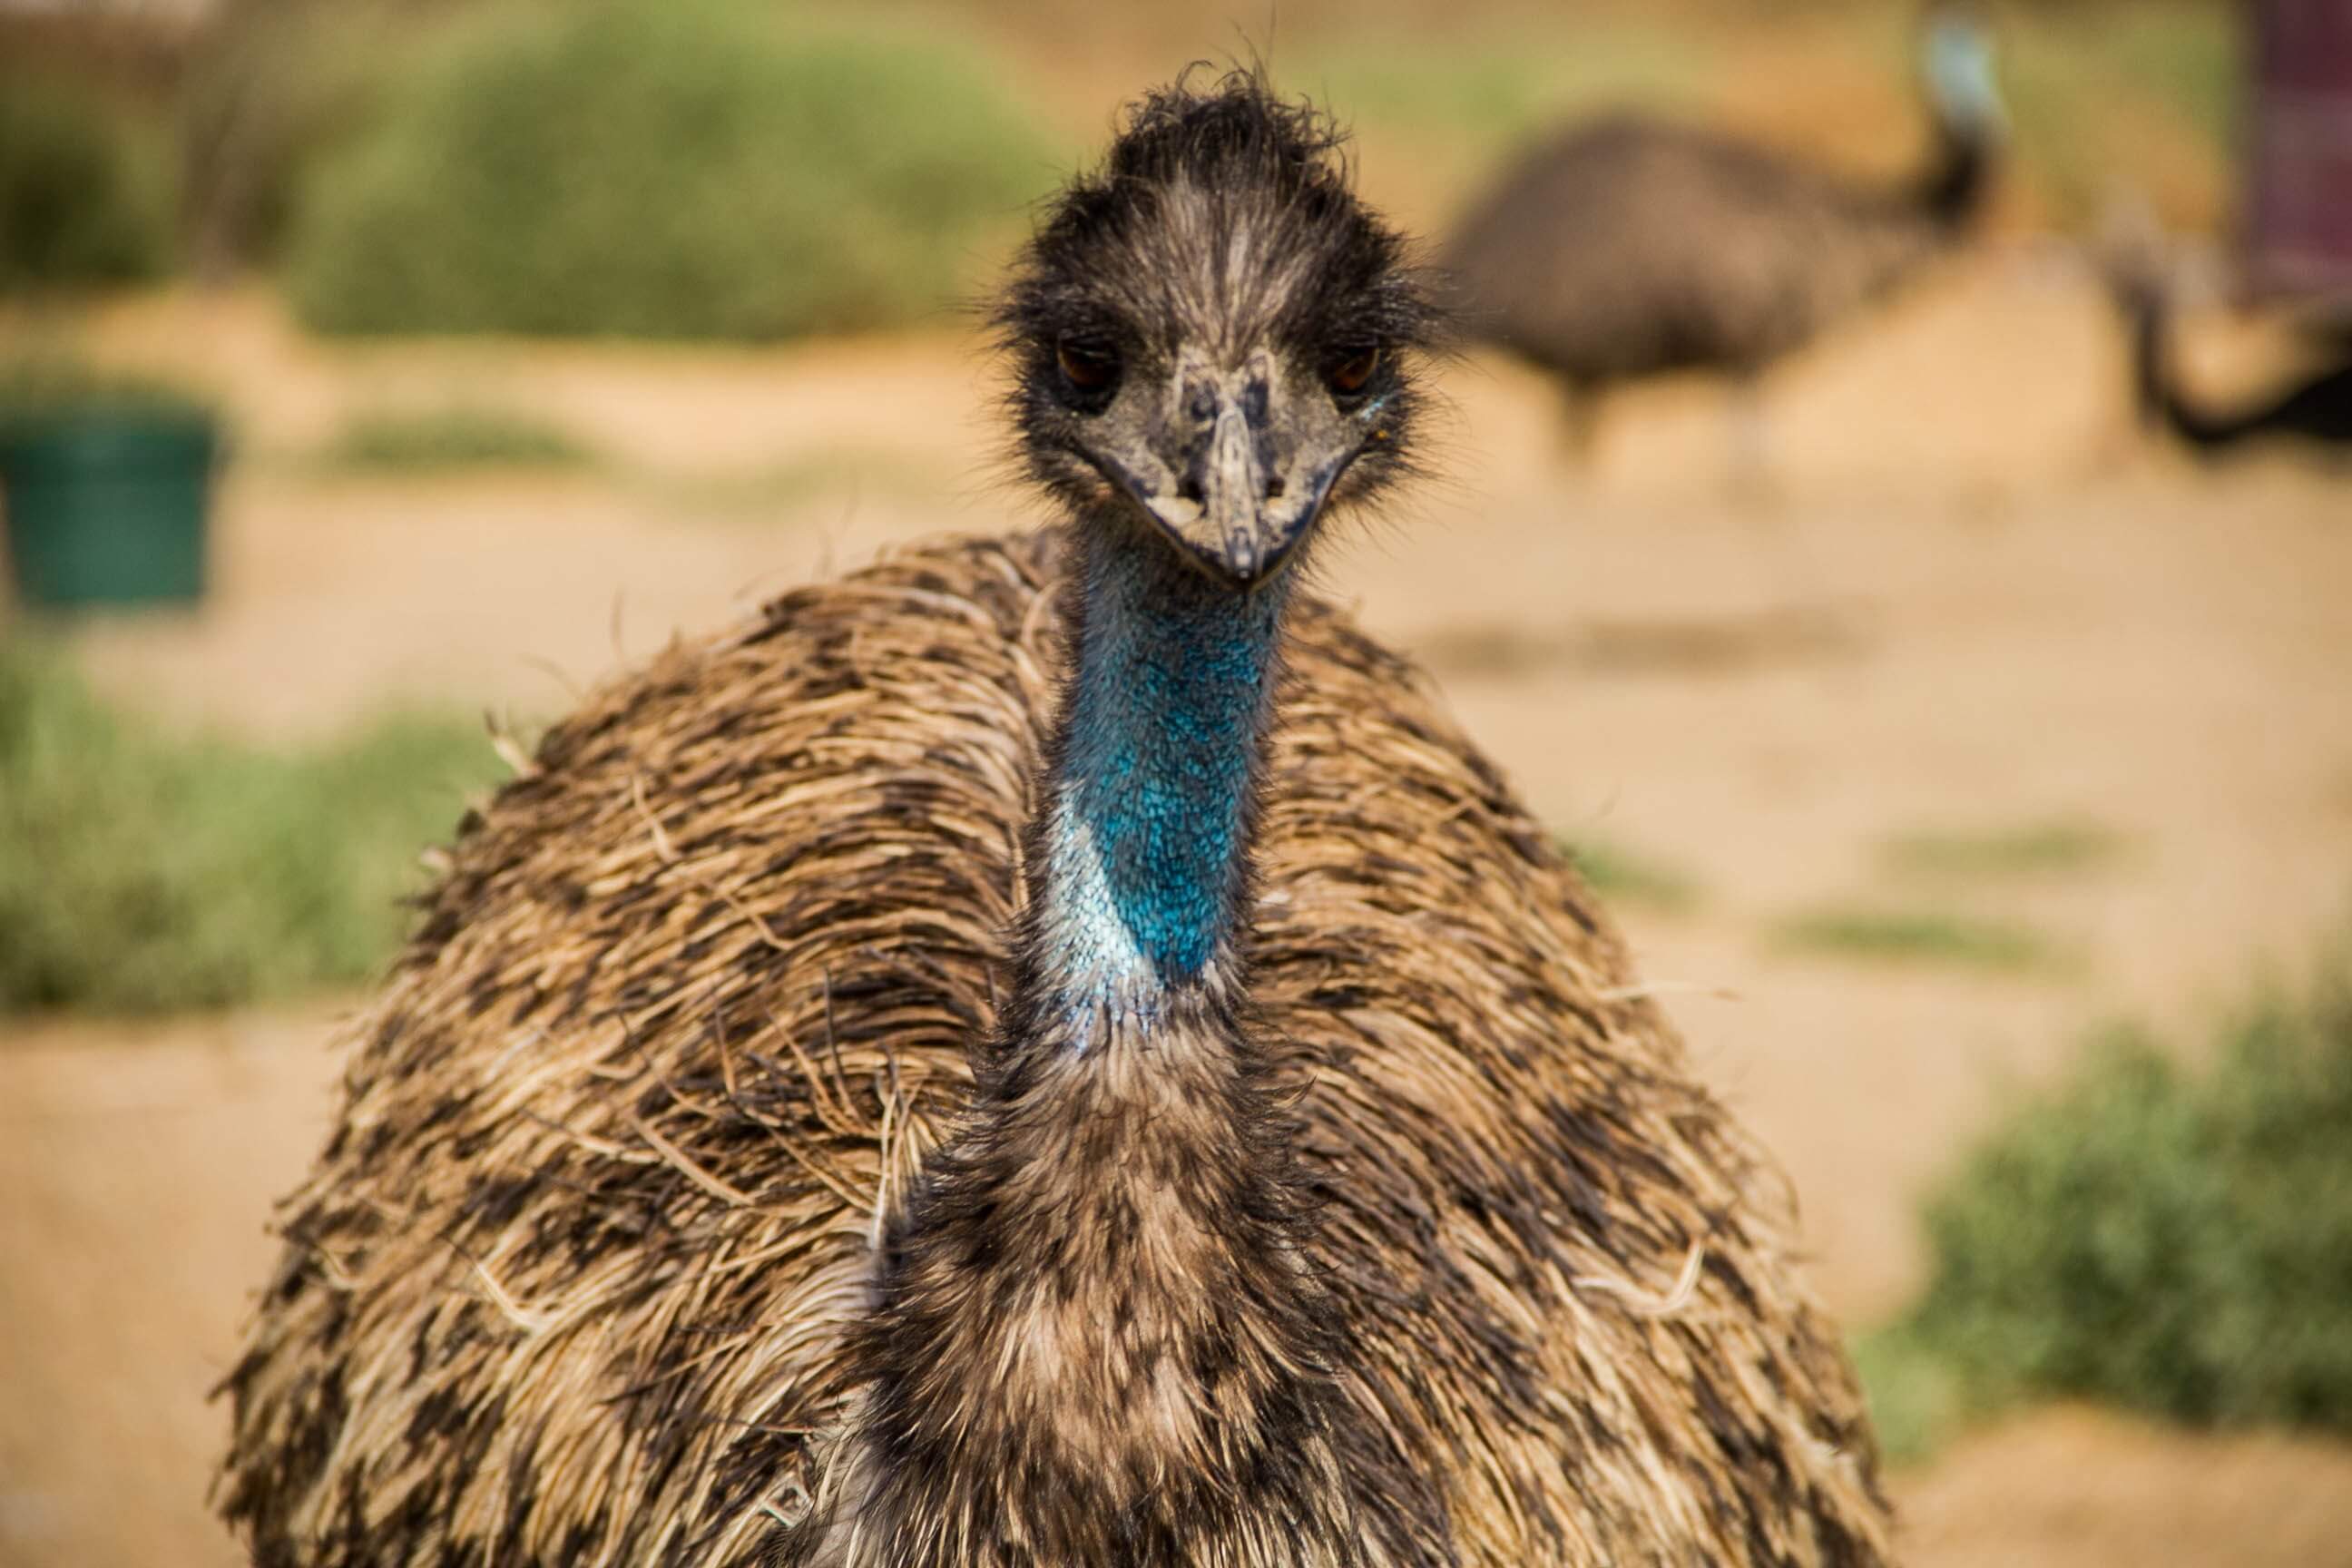 An Emu on the great ocean road